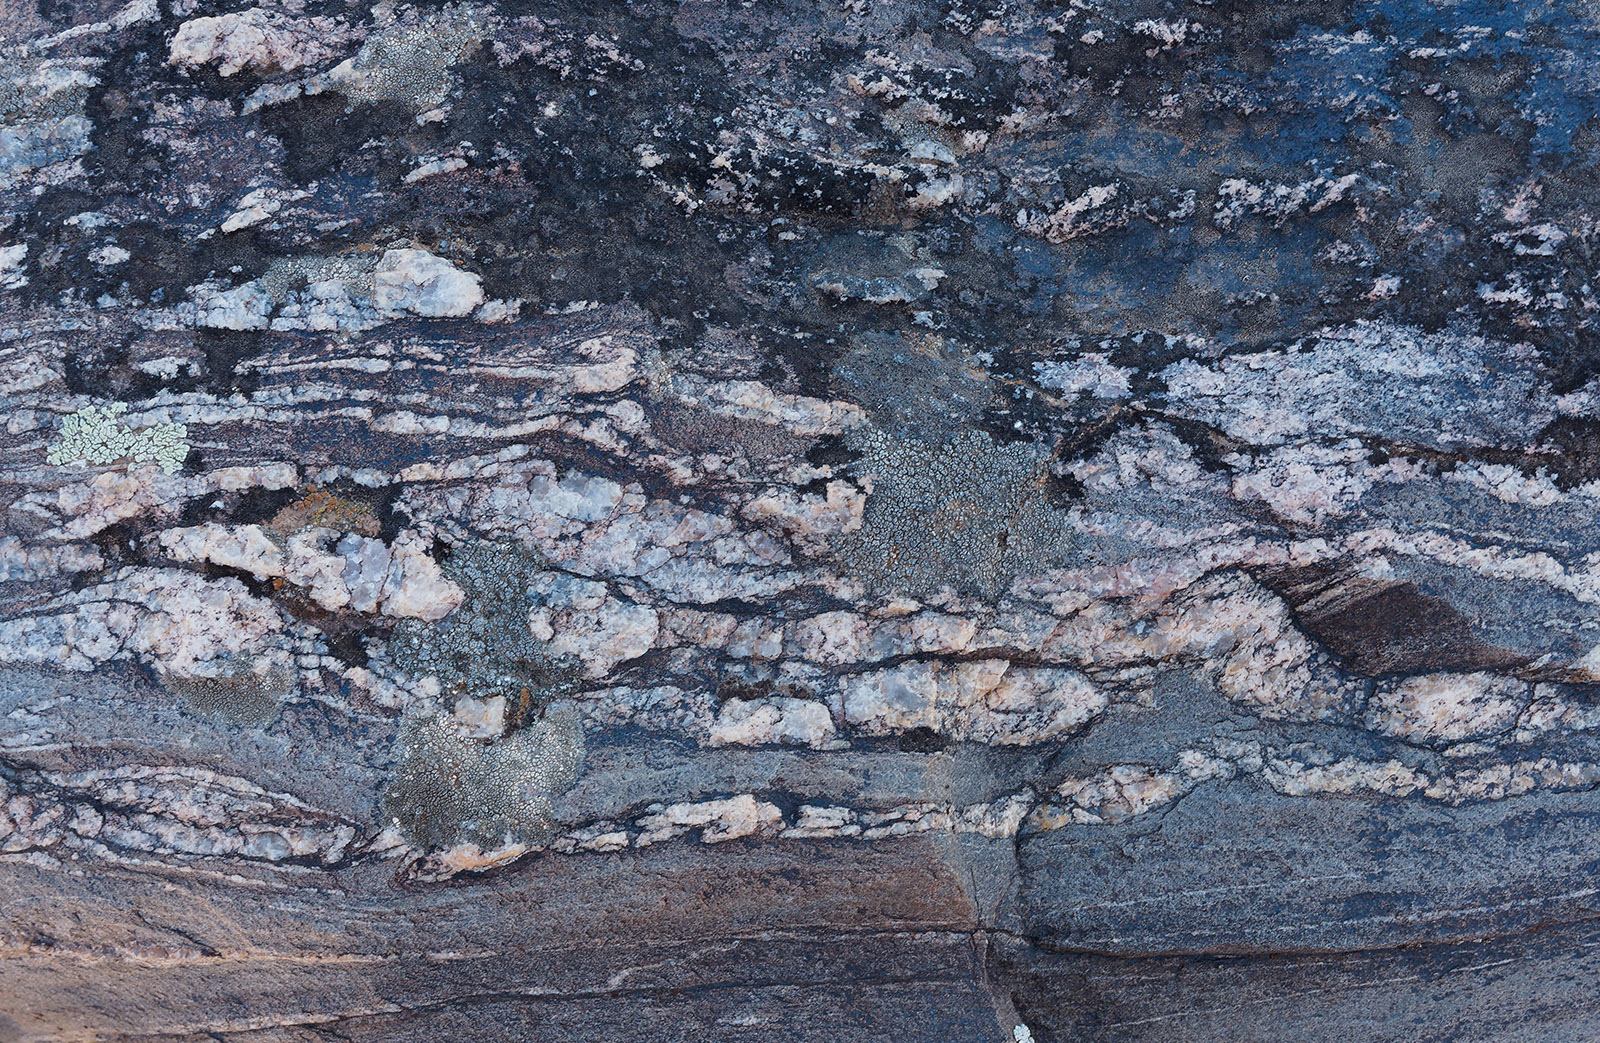 Weathered gneiss with pegmatite veins and lichen, Black Canyon of the Gunnison